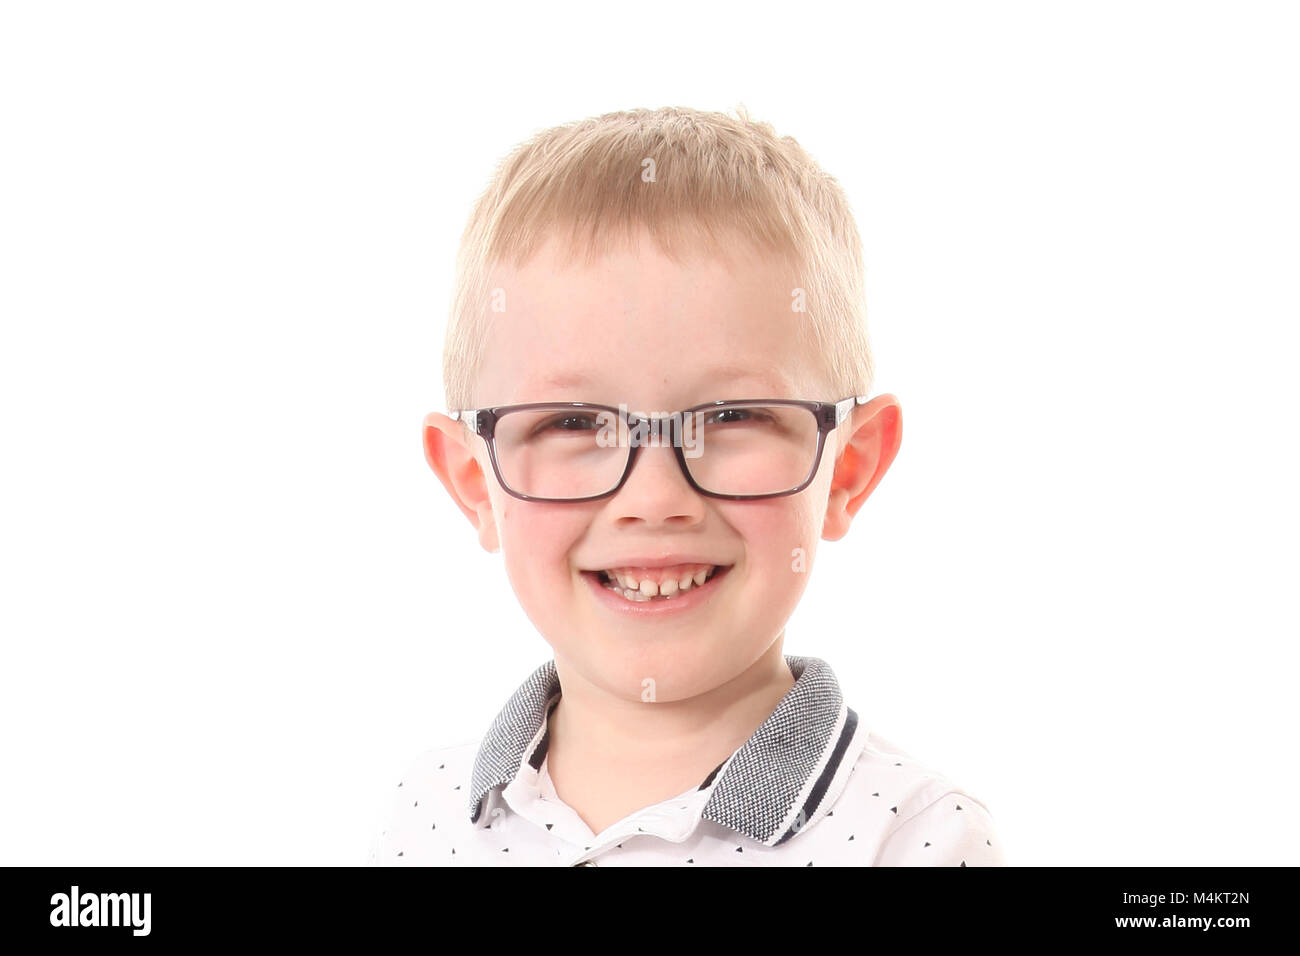 6 year old boy with glasses on Stock Photo